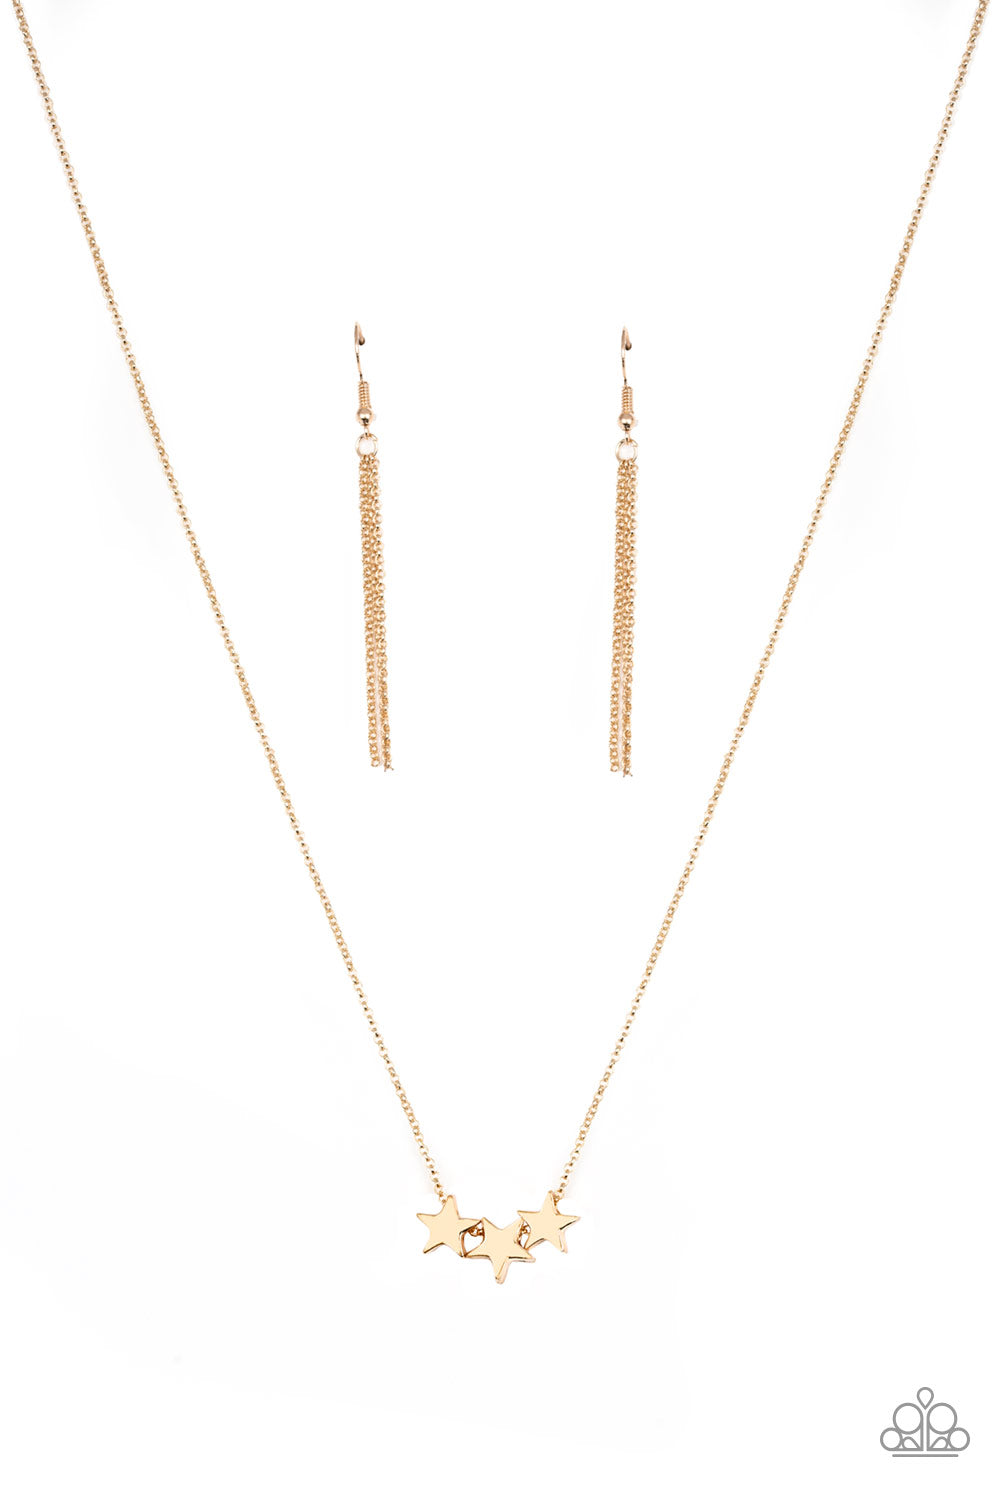 Paparazzi necklace - Shoot For The Stars - Gold